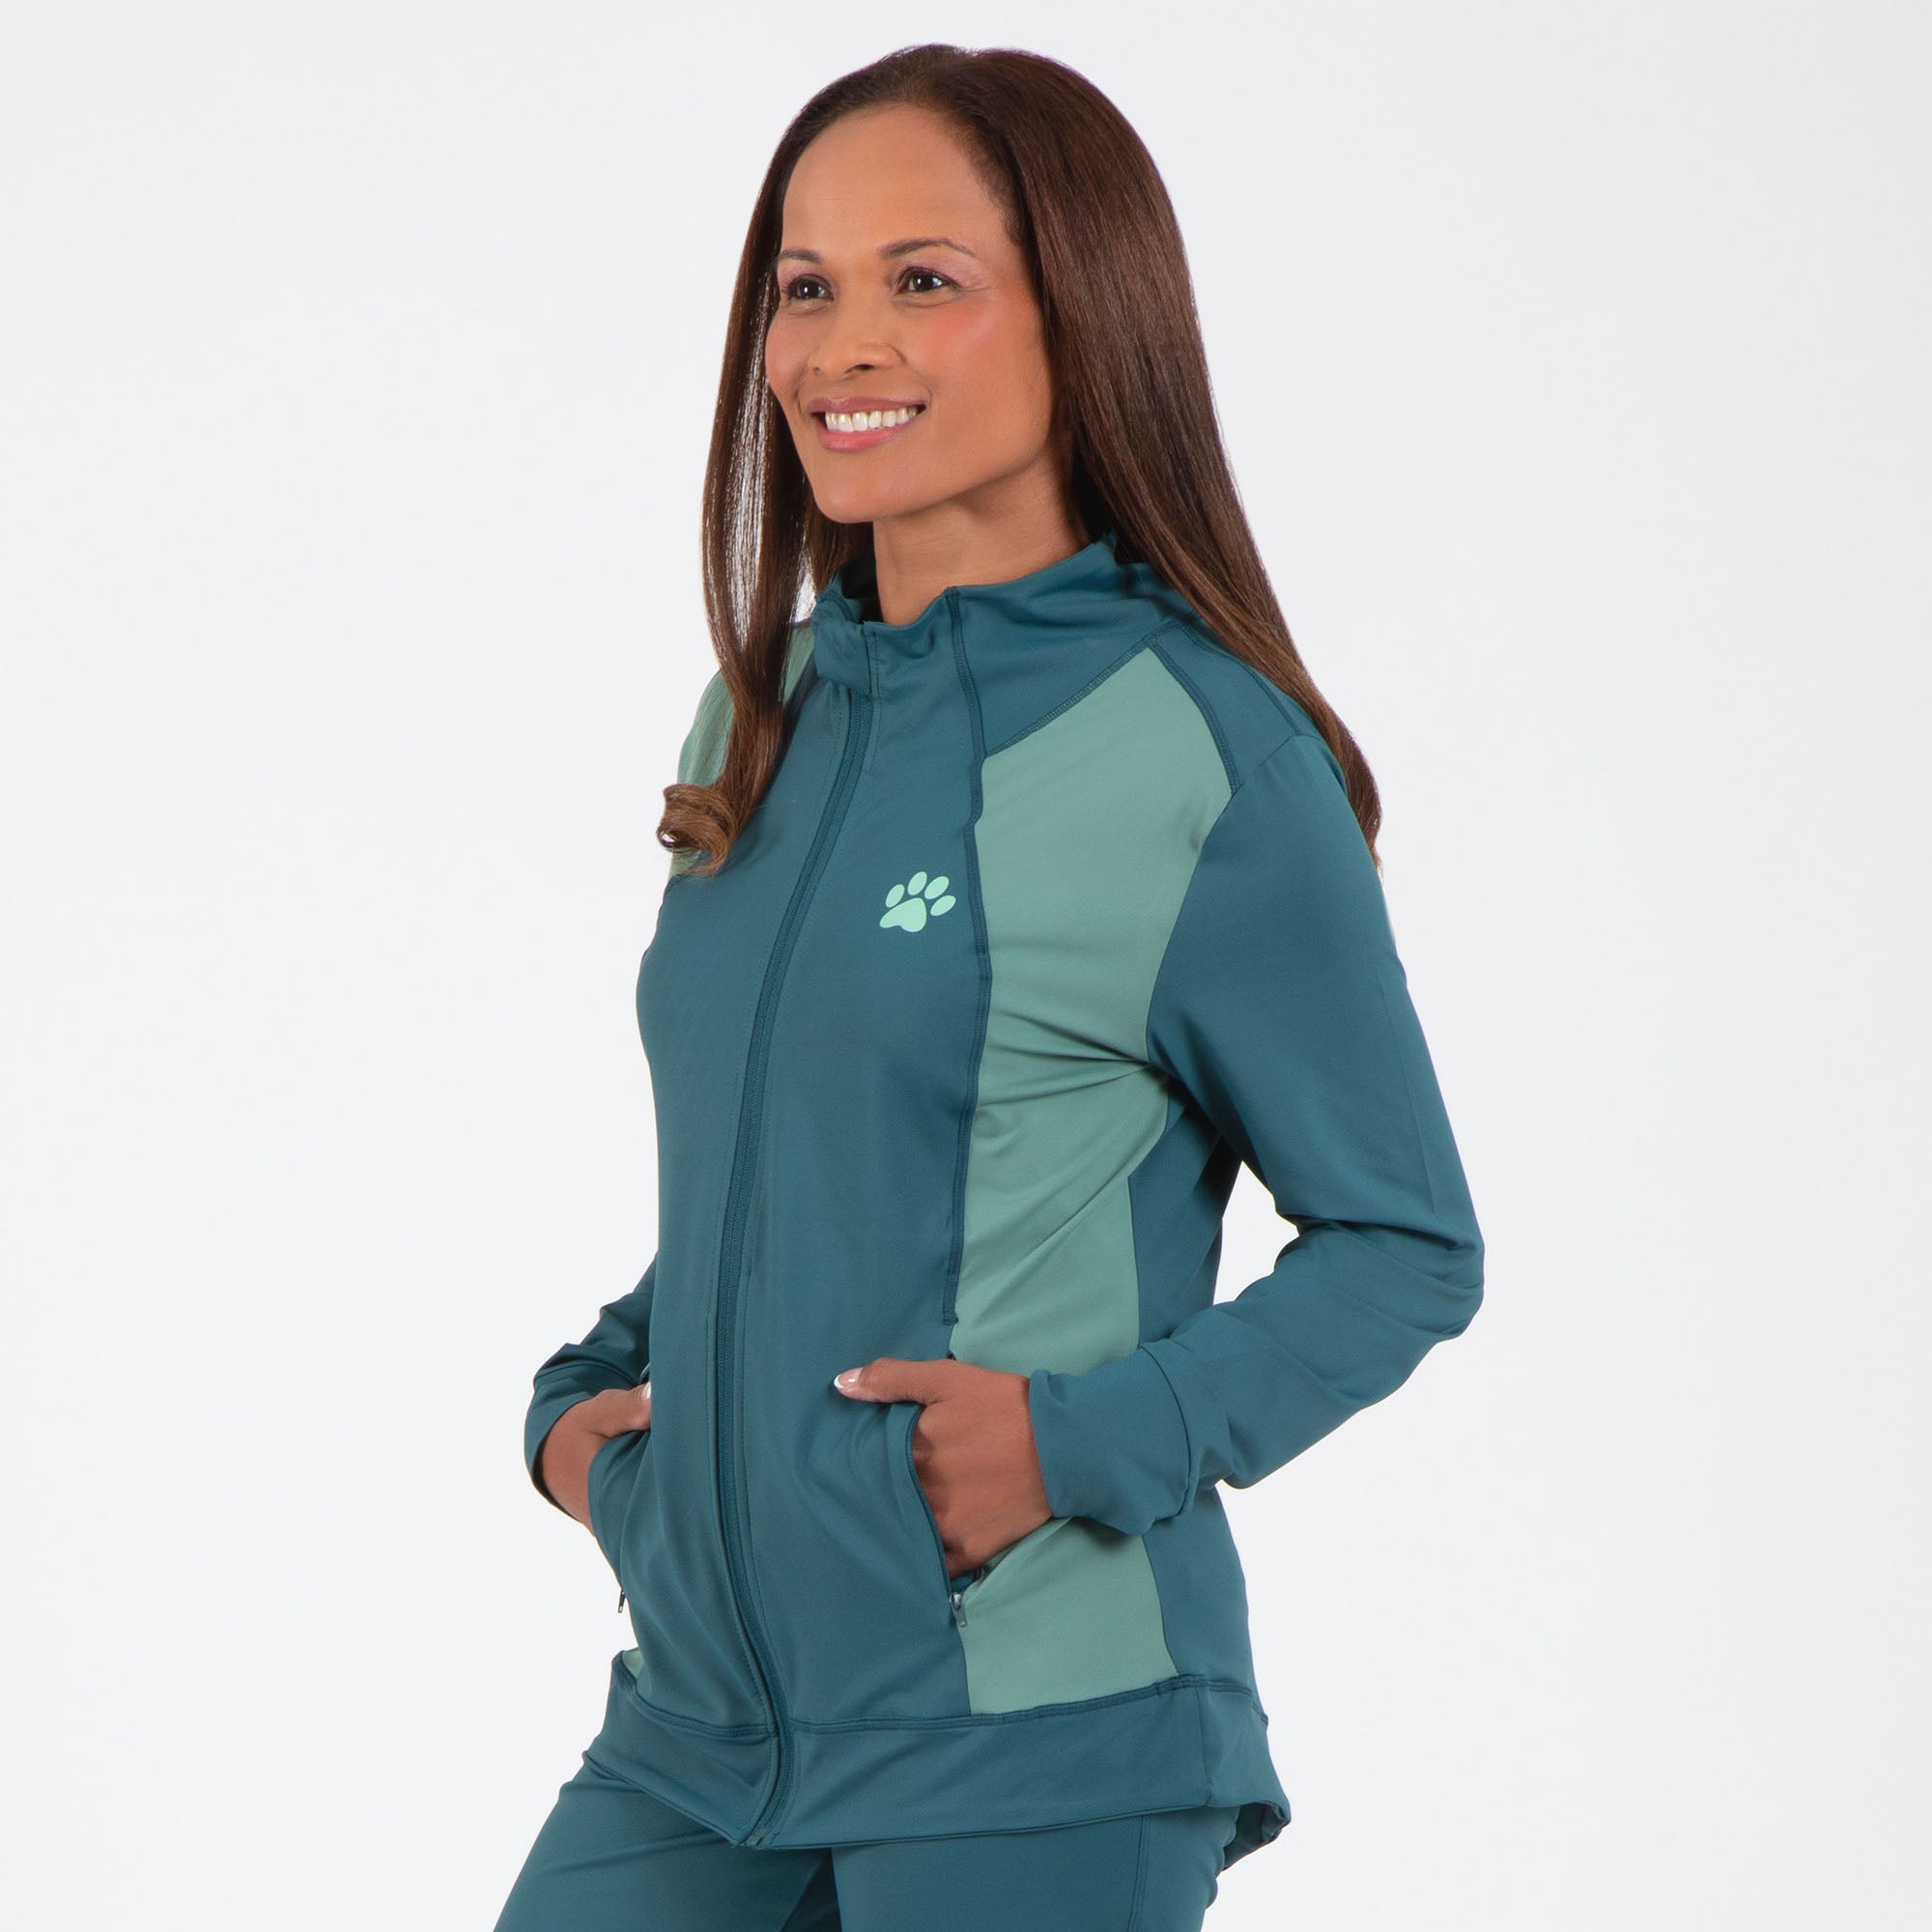 Yoga Paw Print Cross Over Separates - Teal - Jacket - XL